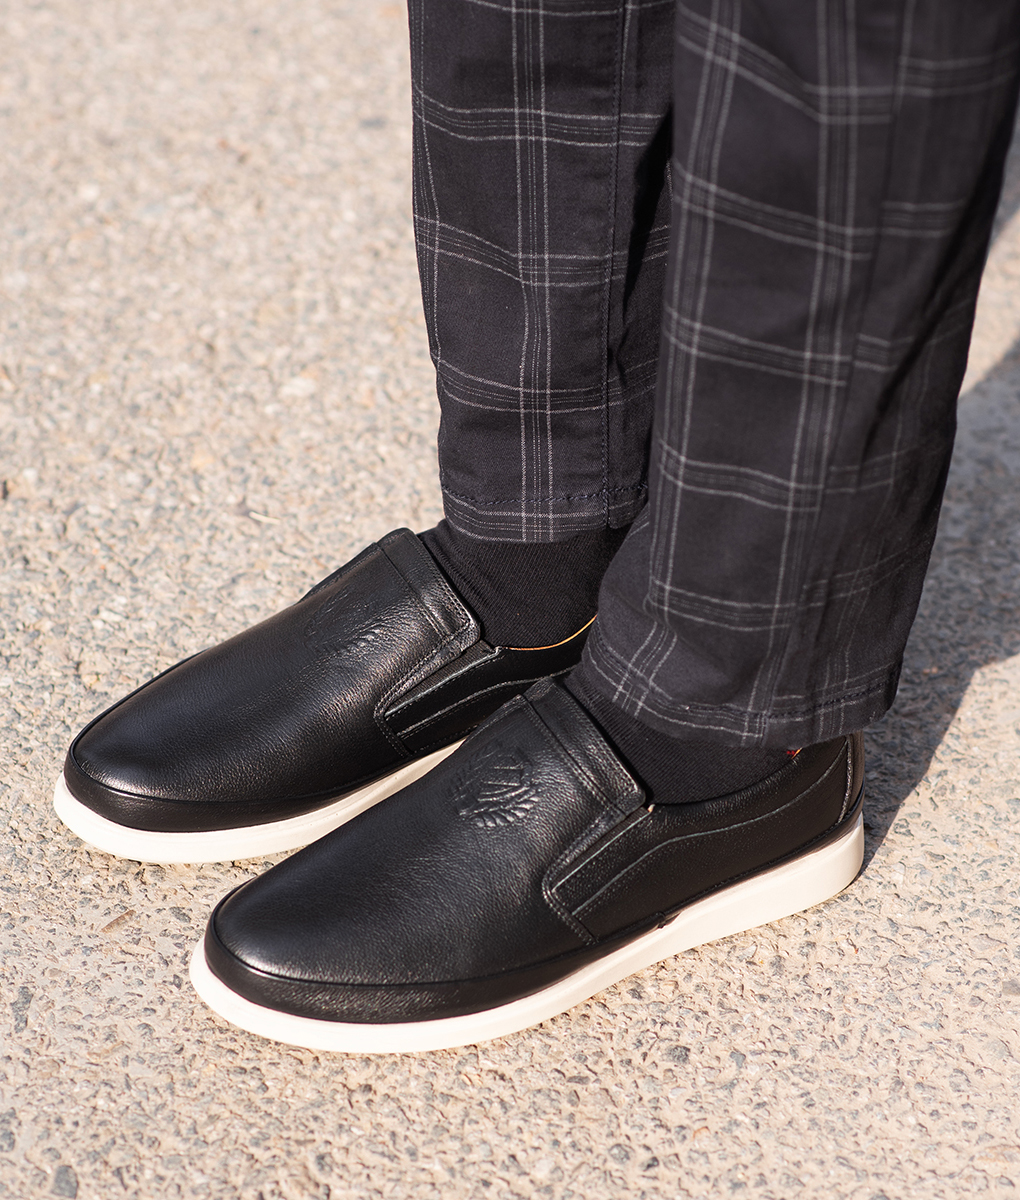 Bold Black Turkey Made Leather Shoes for Men